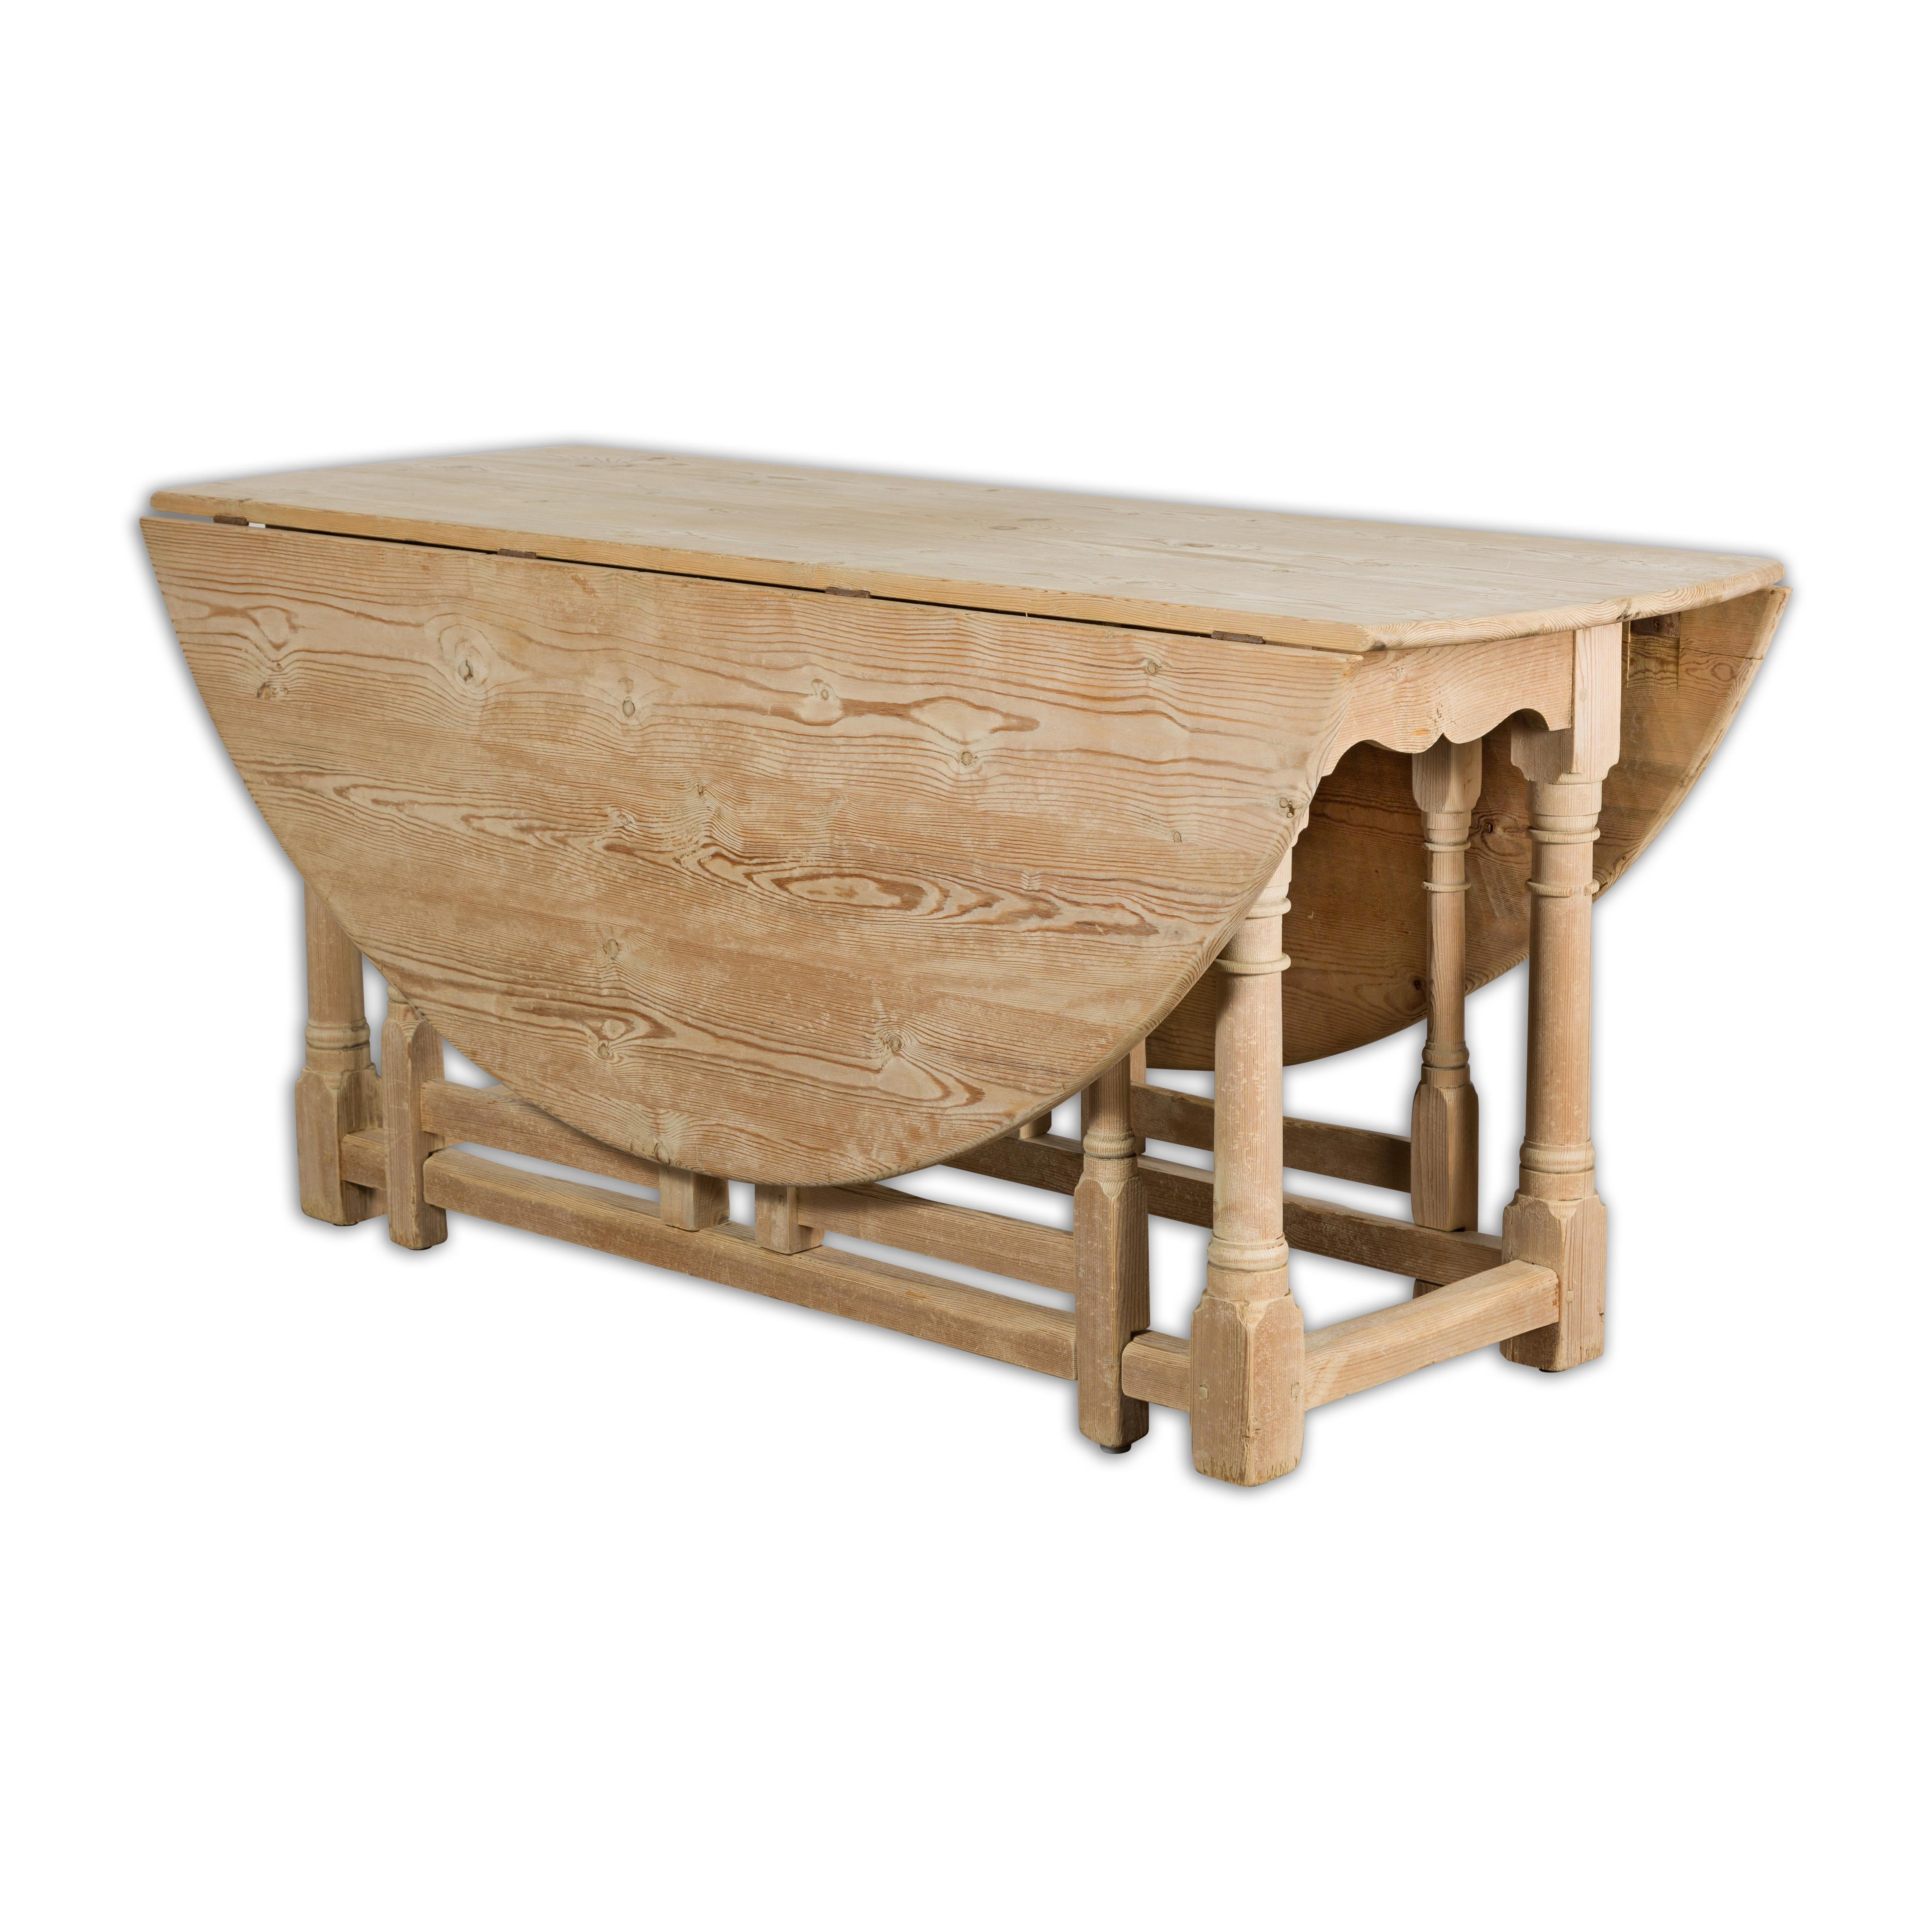 A rustic English pine drop leaf table from the 19th century with round top, turned legs, carved apron, plain side stretchers and rectangular block joints. Introduce a touch of rustic charm to your home with this exquisite 19th-century English pine